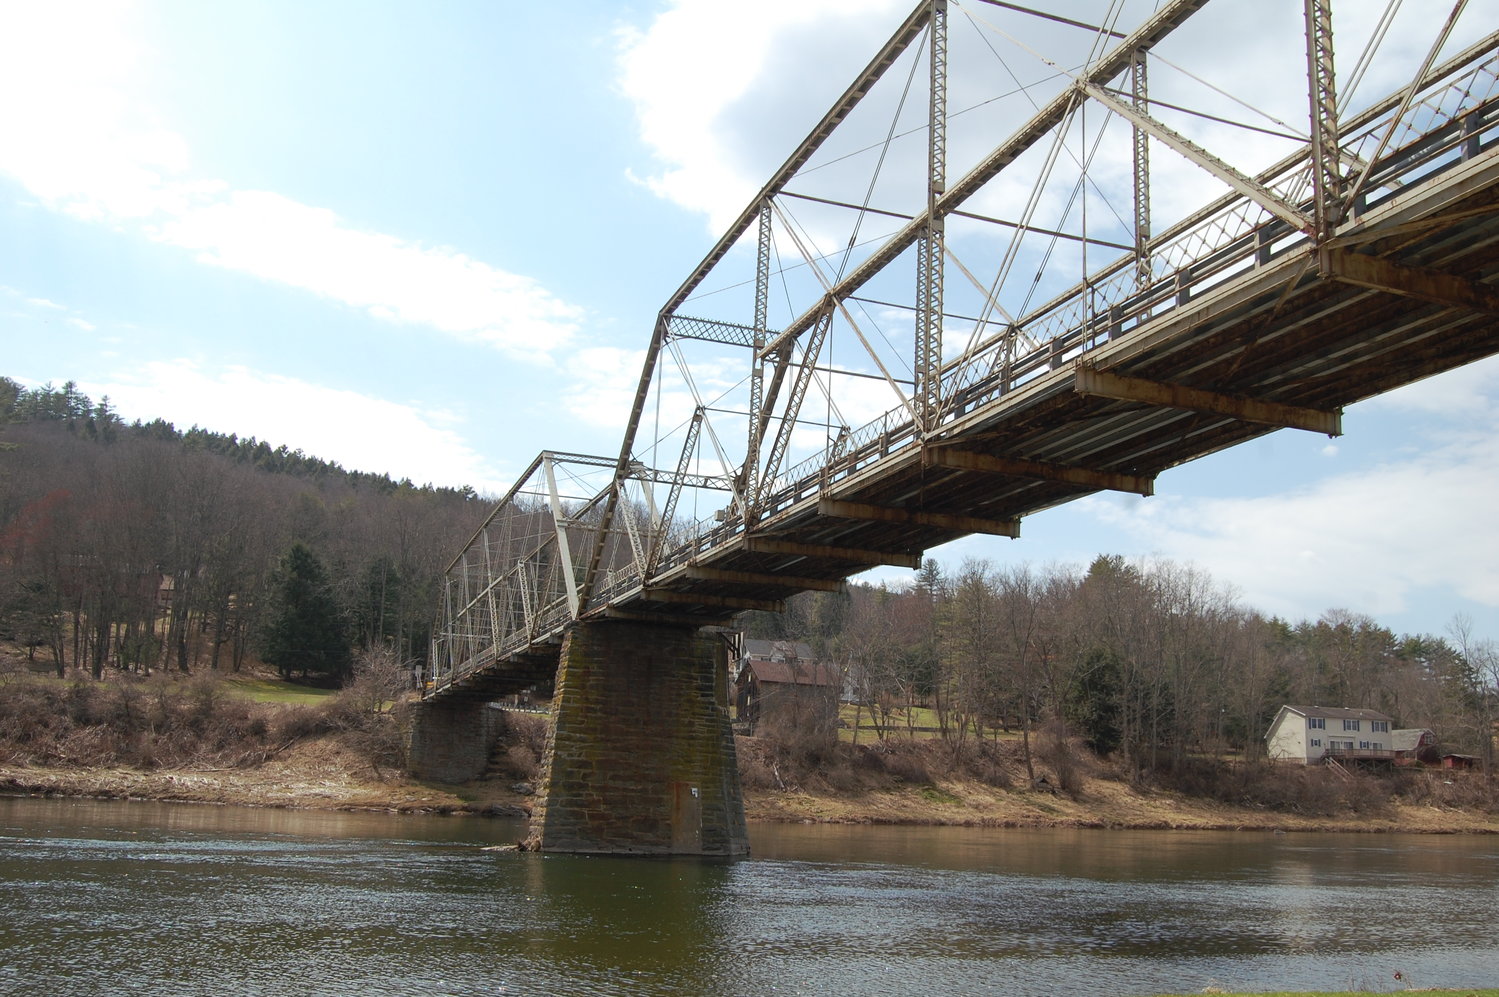 The Skinners Falls Bridge, with its Baltimore truss structure and single-lane wooden plank deck, as shown here, was constructed in 1902.